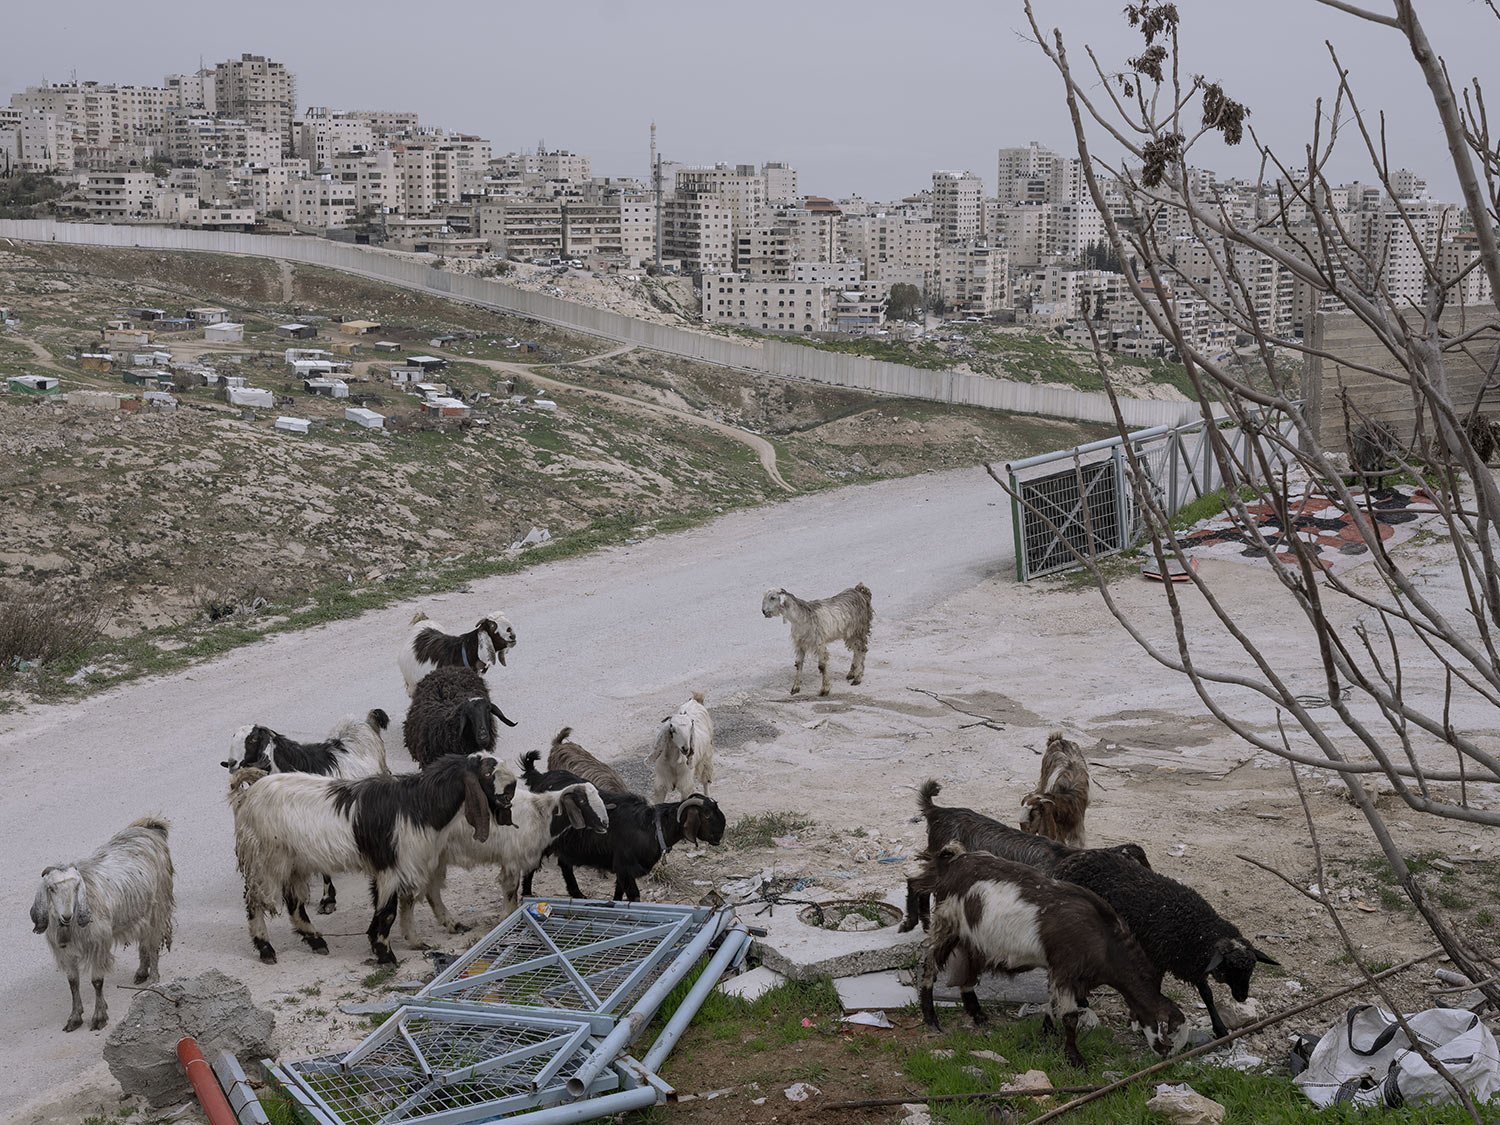  Goats graze in east Jerusalem, backdrop by a section of Israel's separation barrier surrounding the Shuafat refugee camp, March 8, 2022. (AP Photo/Oded Balilty) 